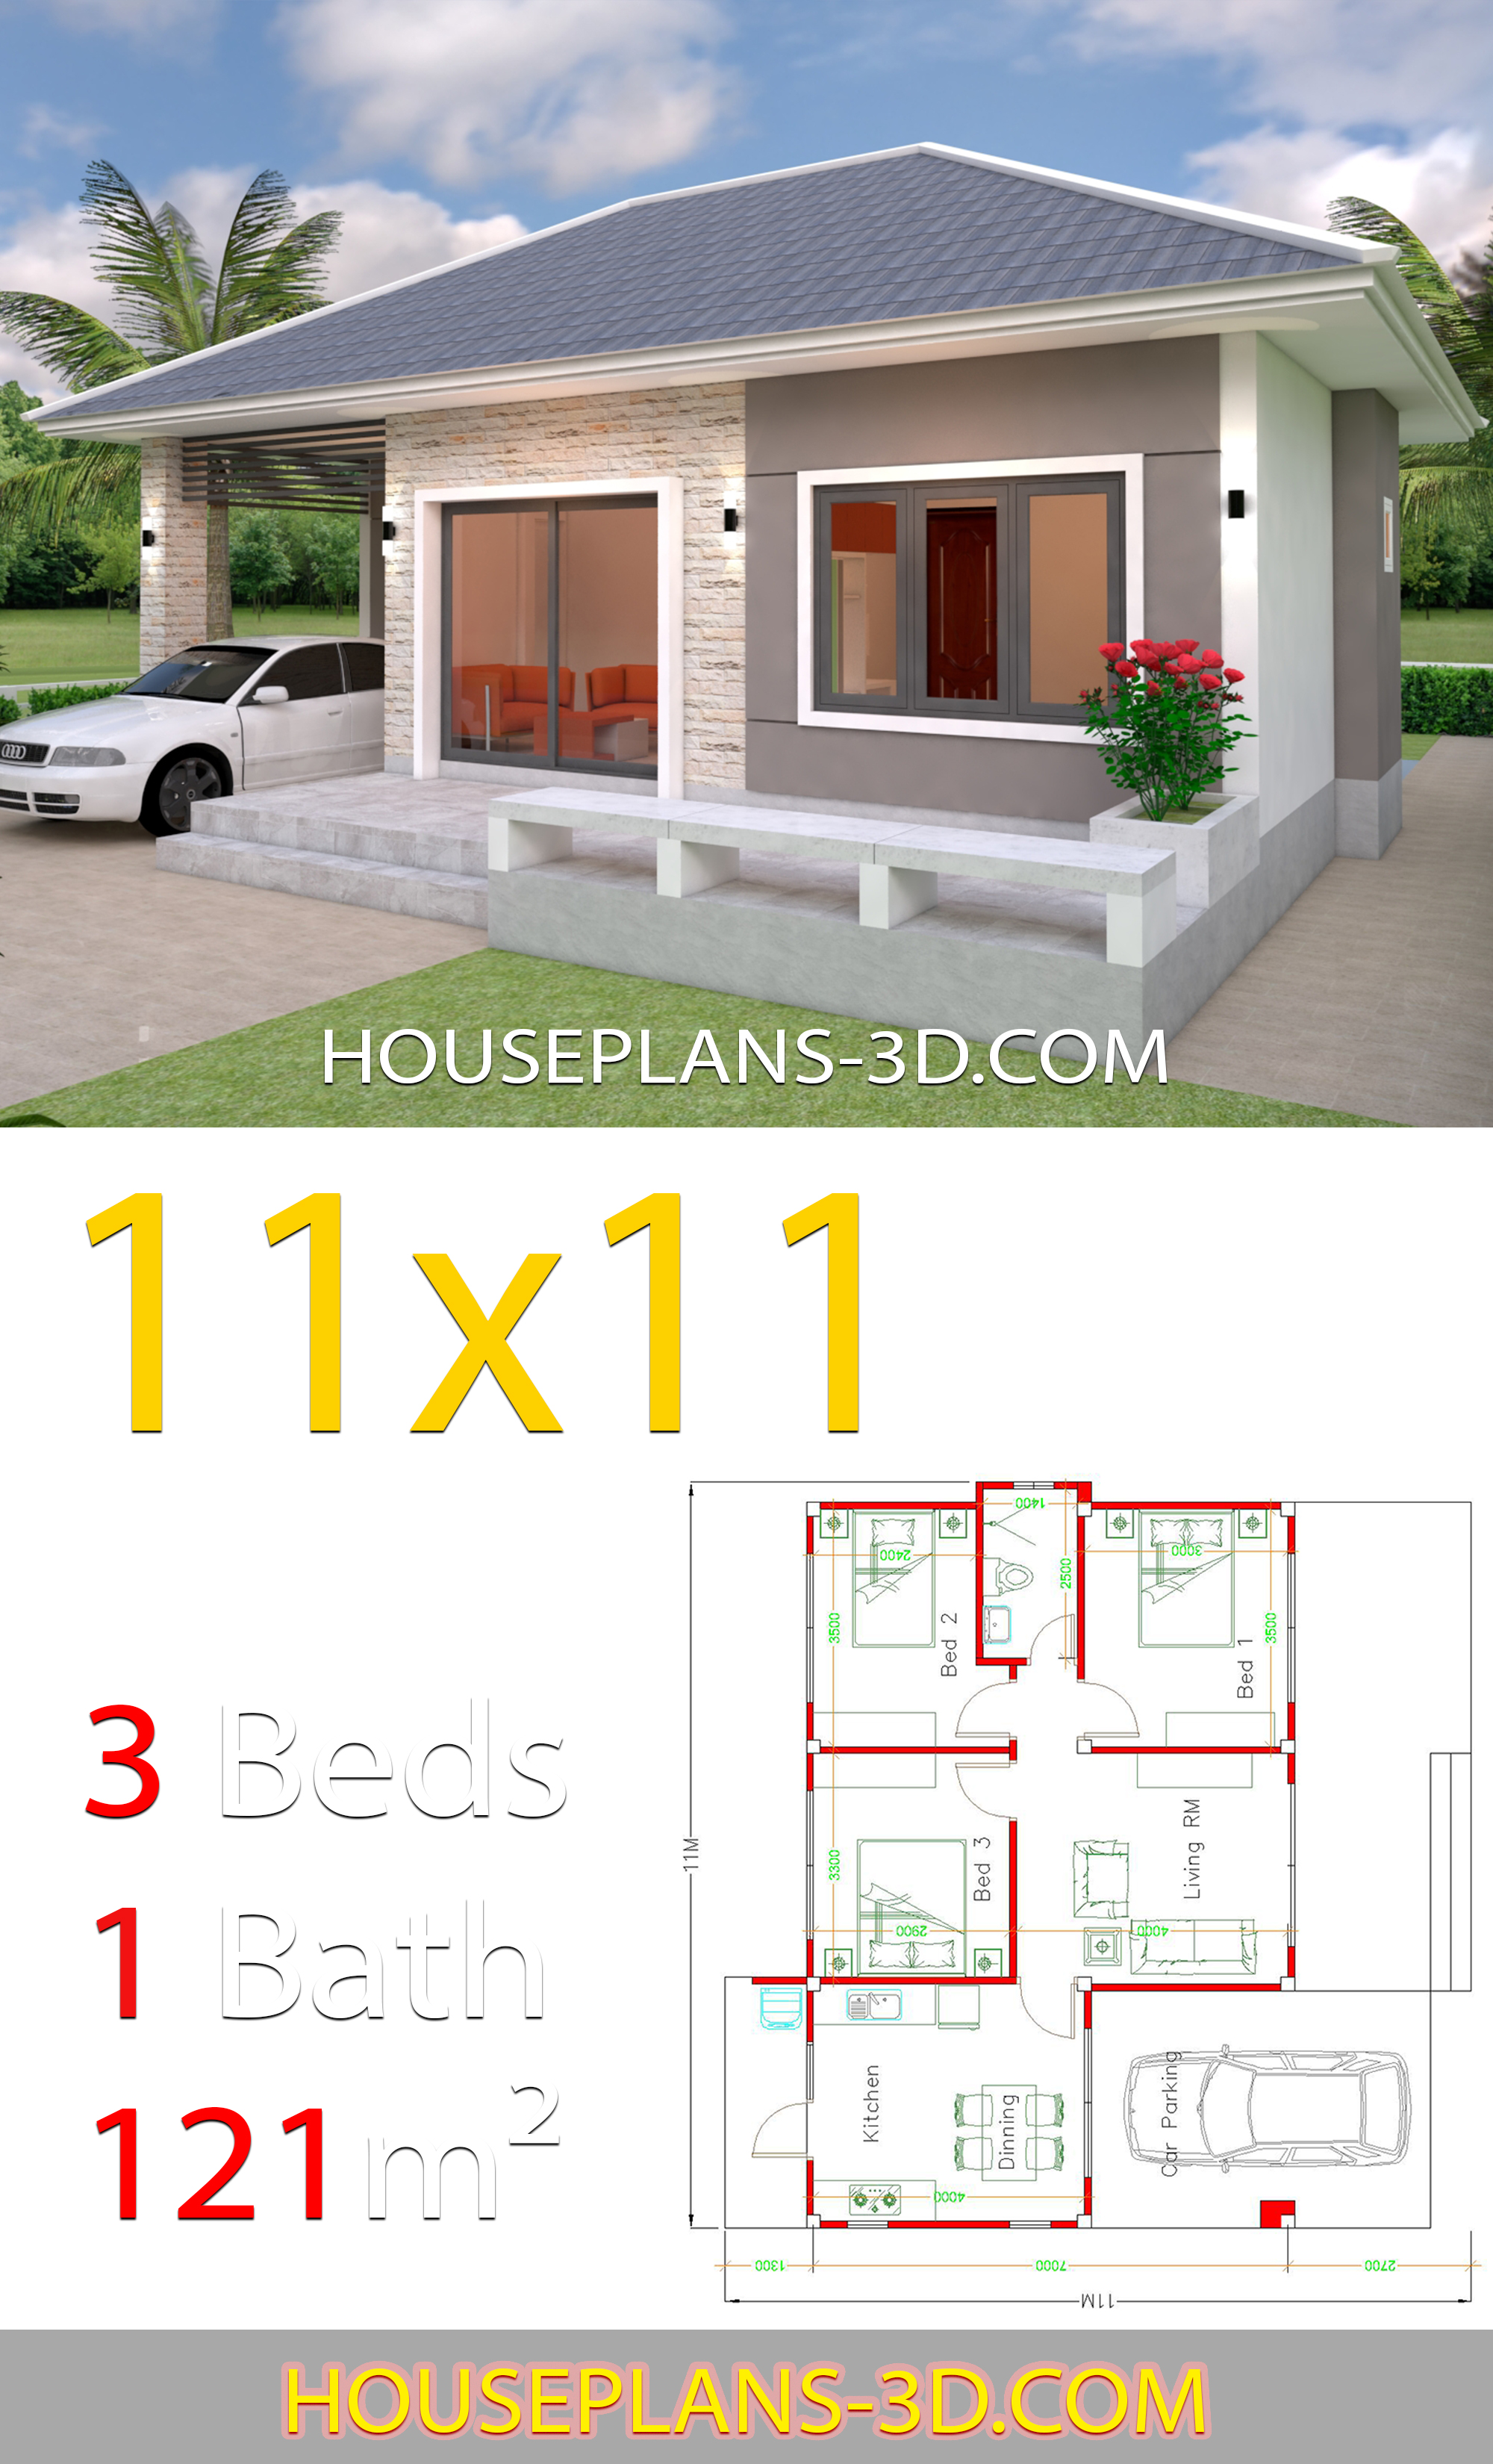 House Design 11x11 with 3 Bedrooms Hip roof - House Plans 3D